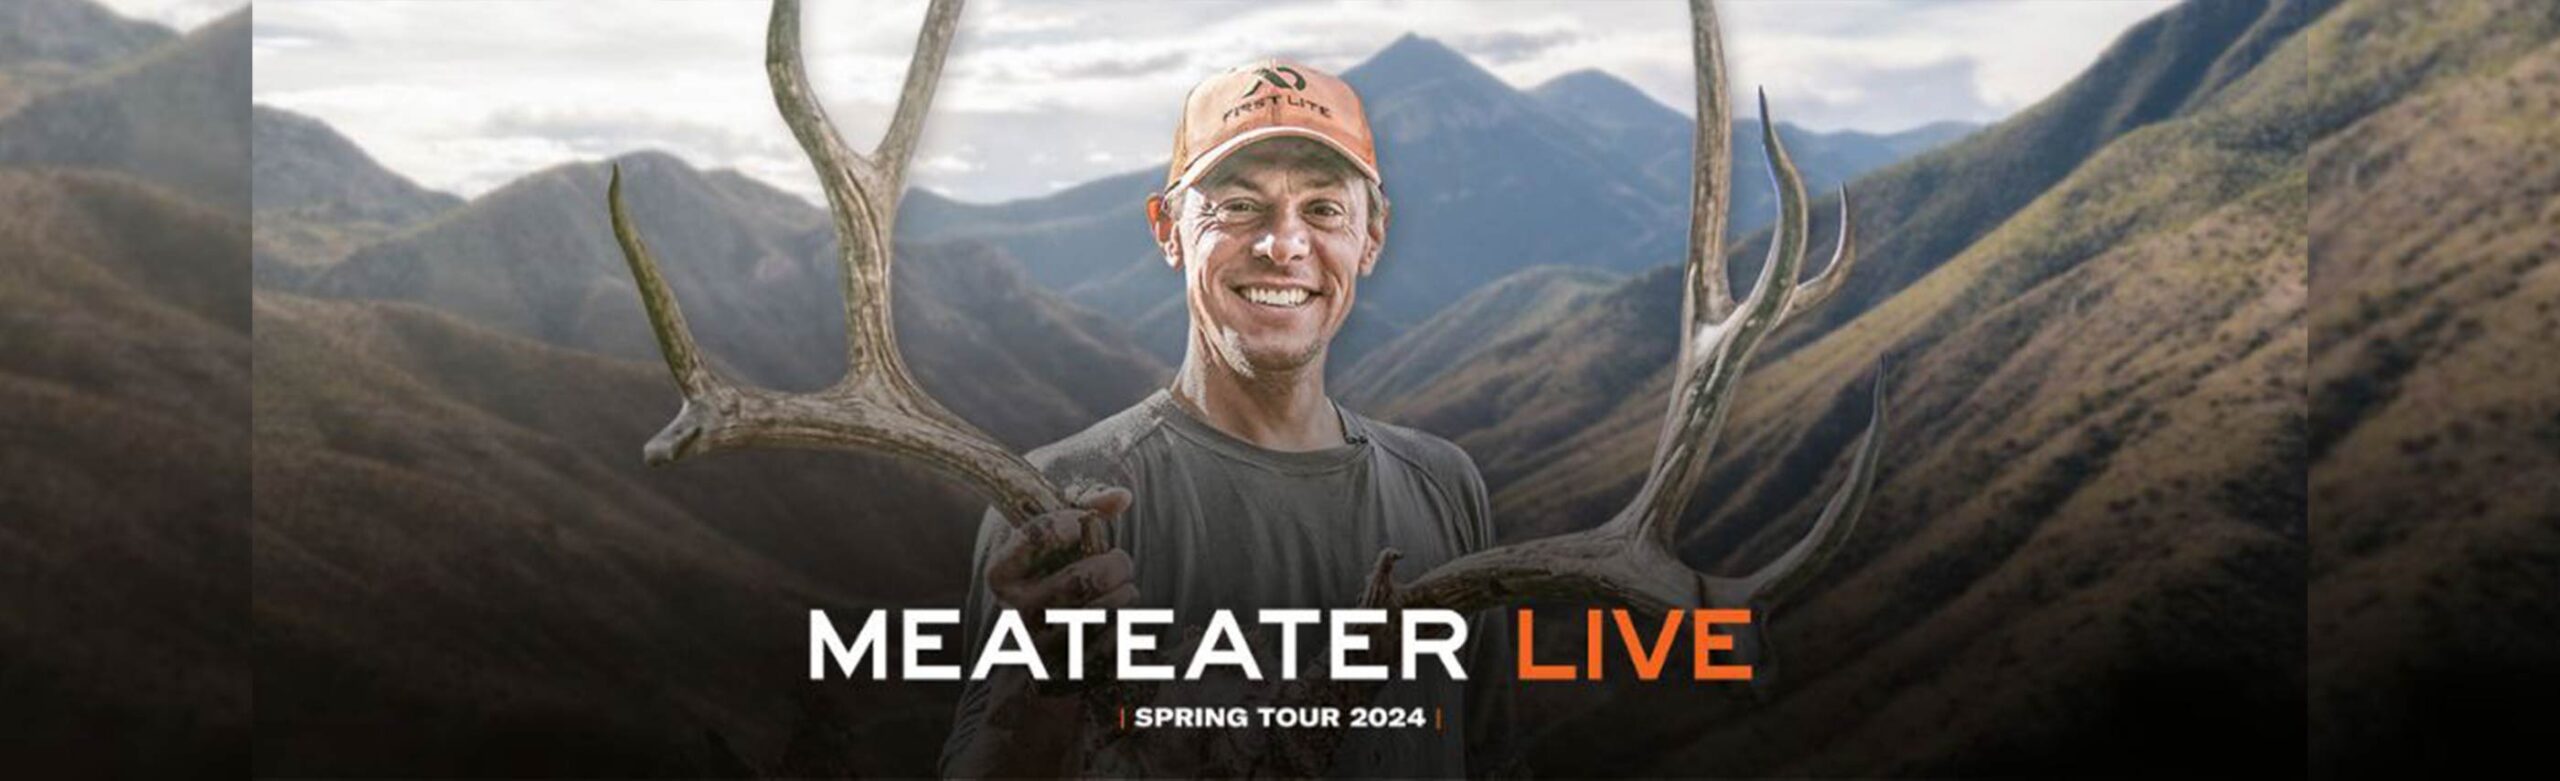 MeatEater LIVE